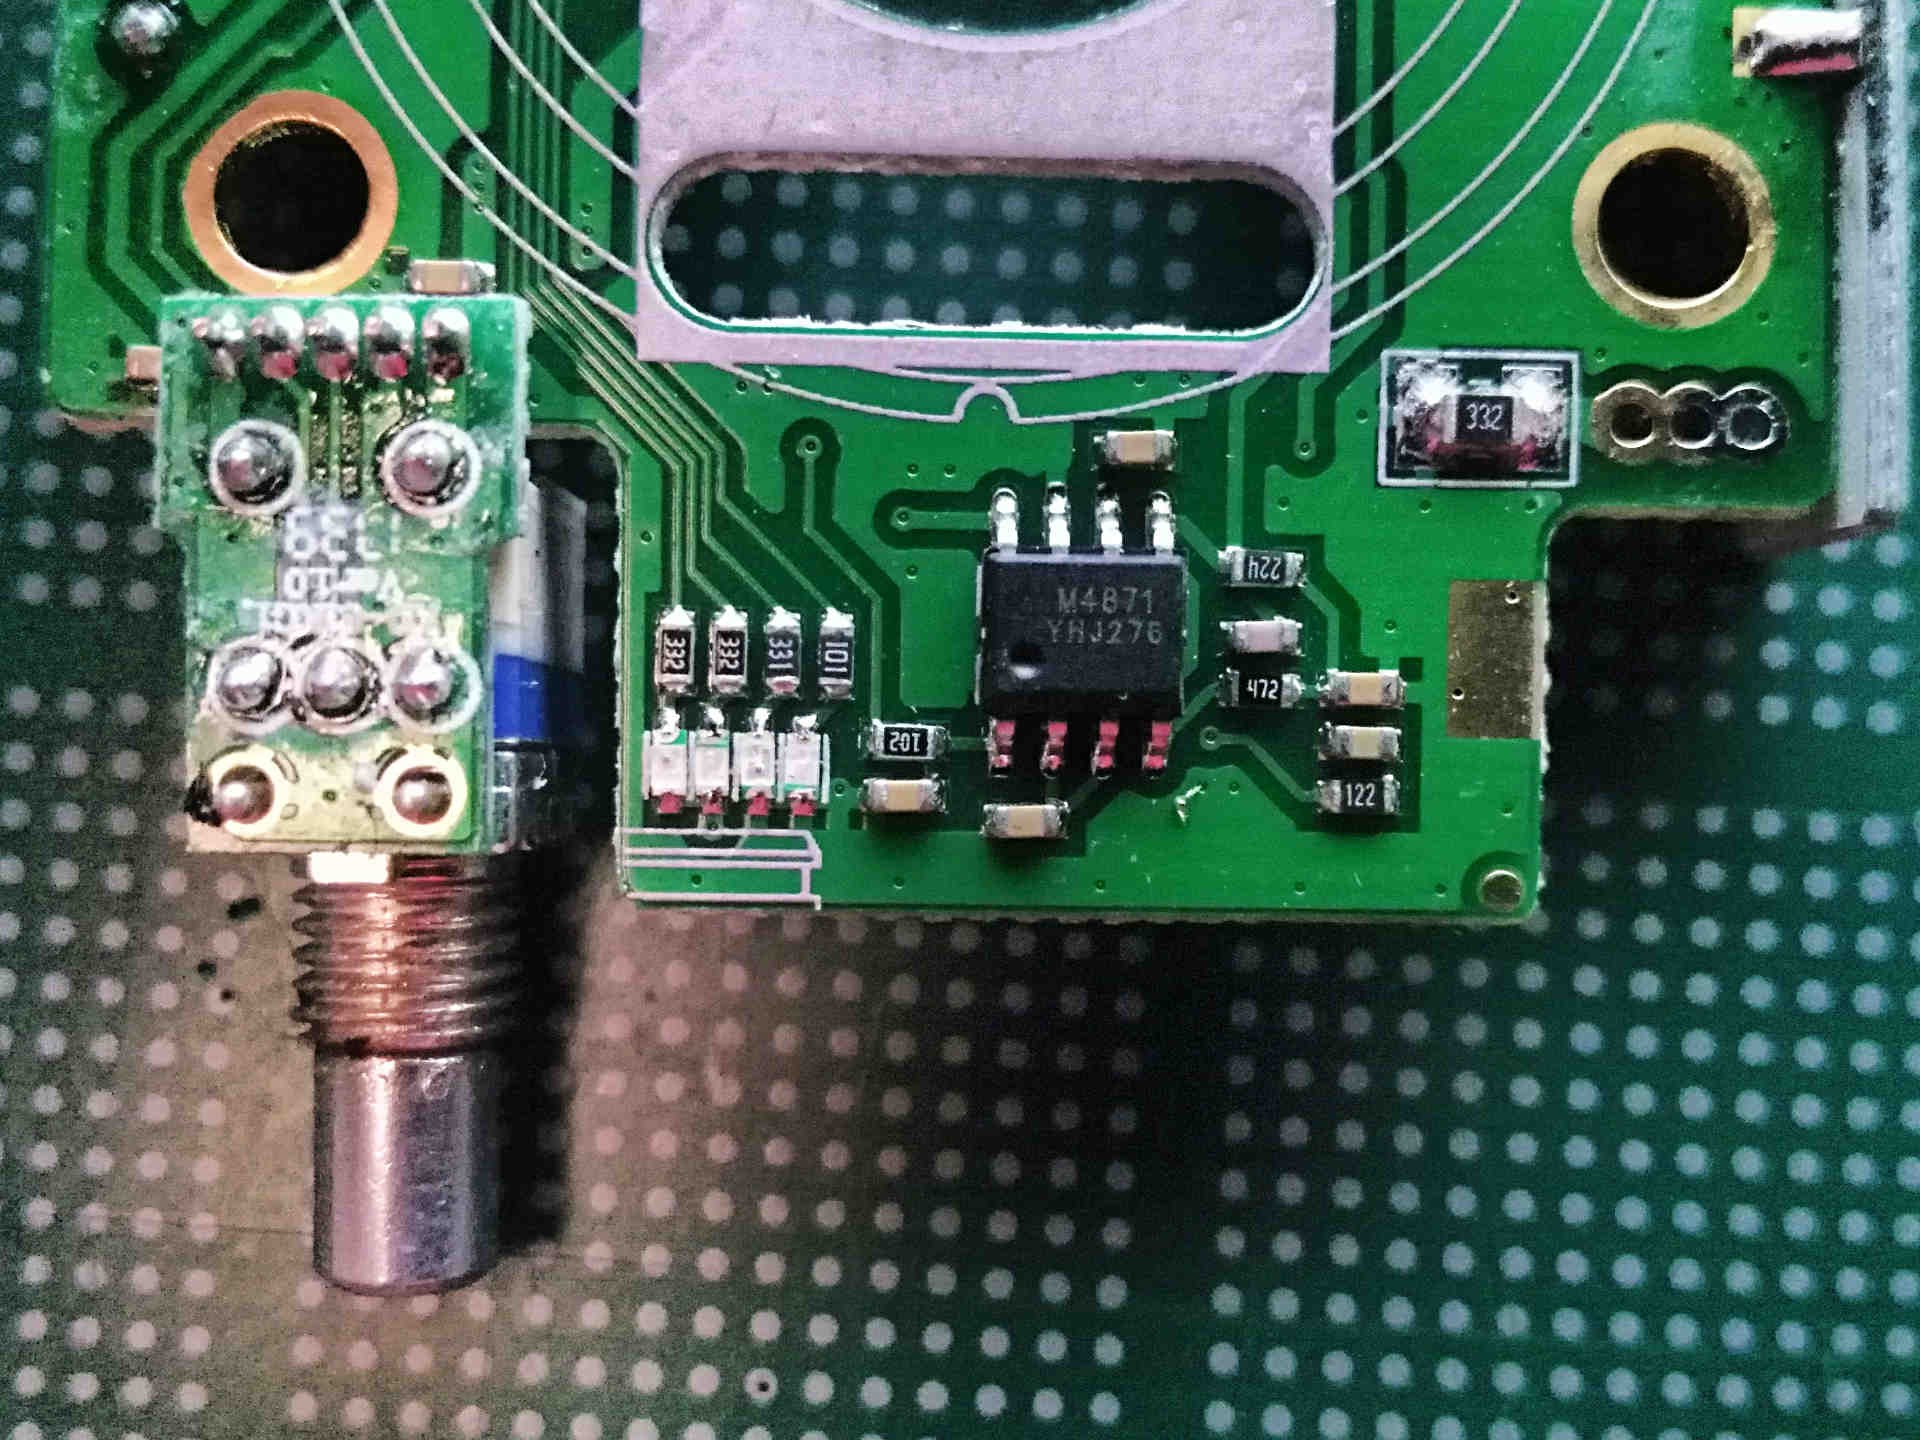 Top of the front of the PCB